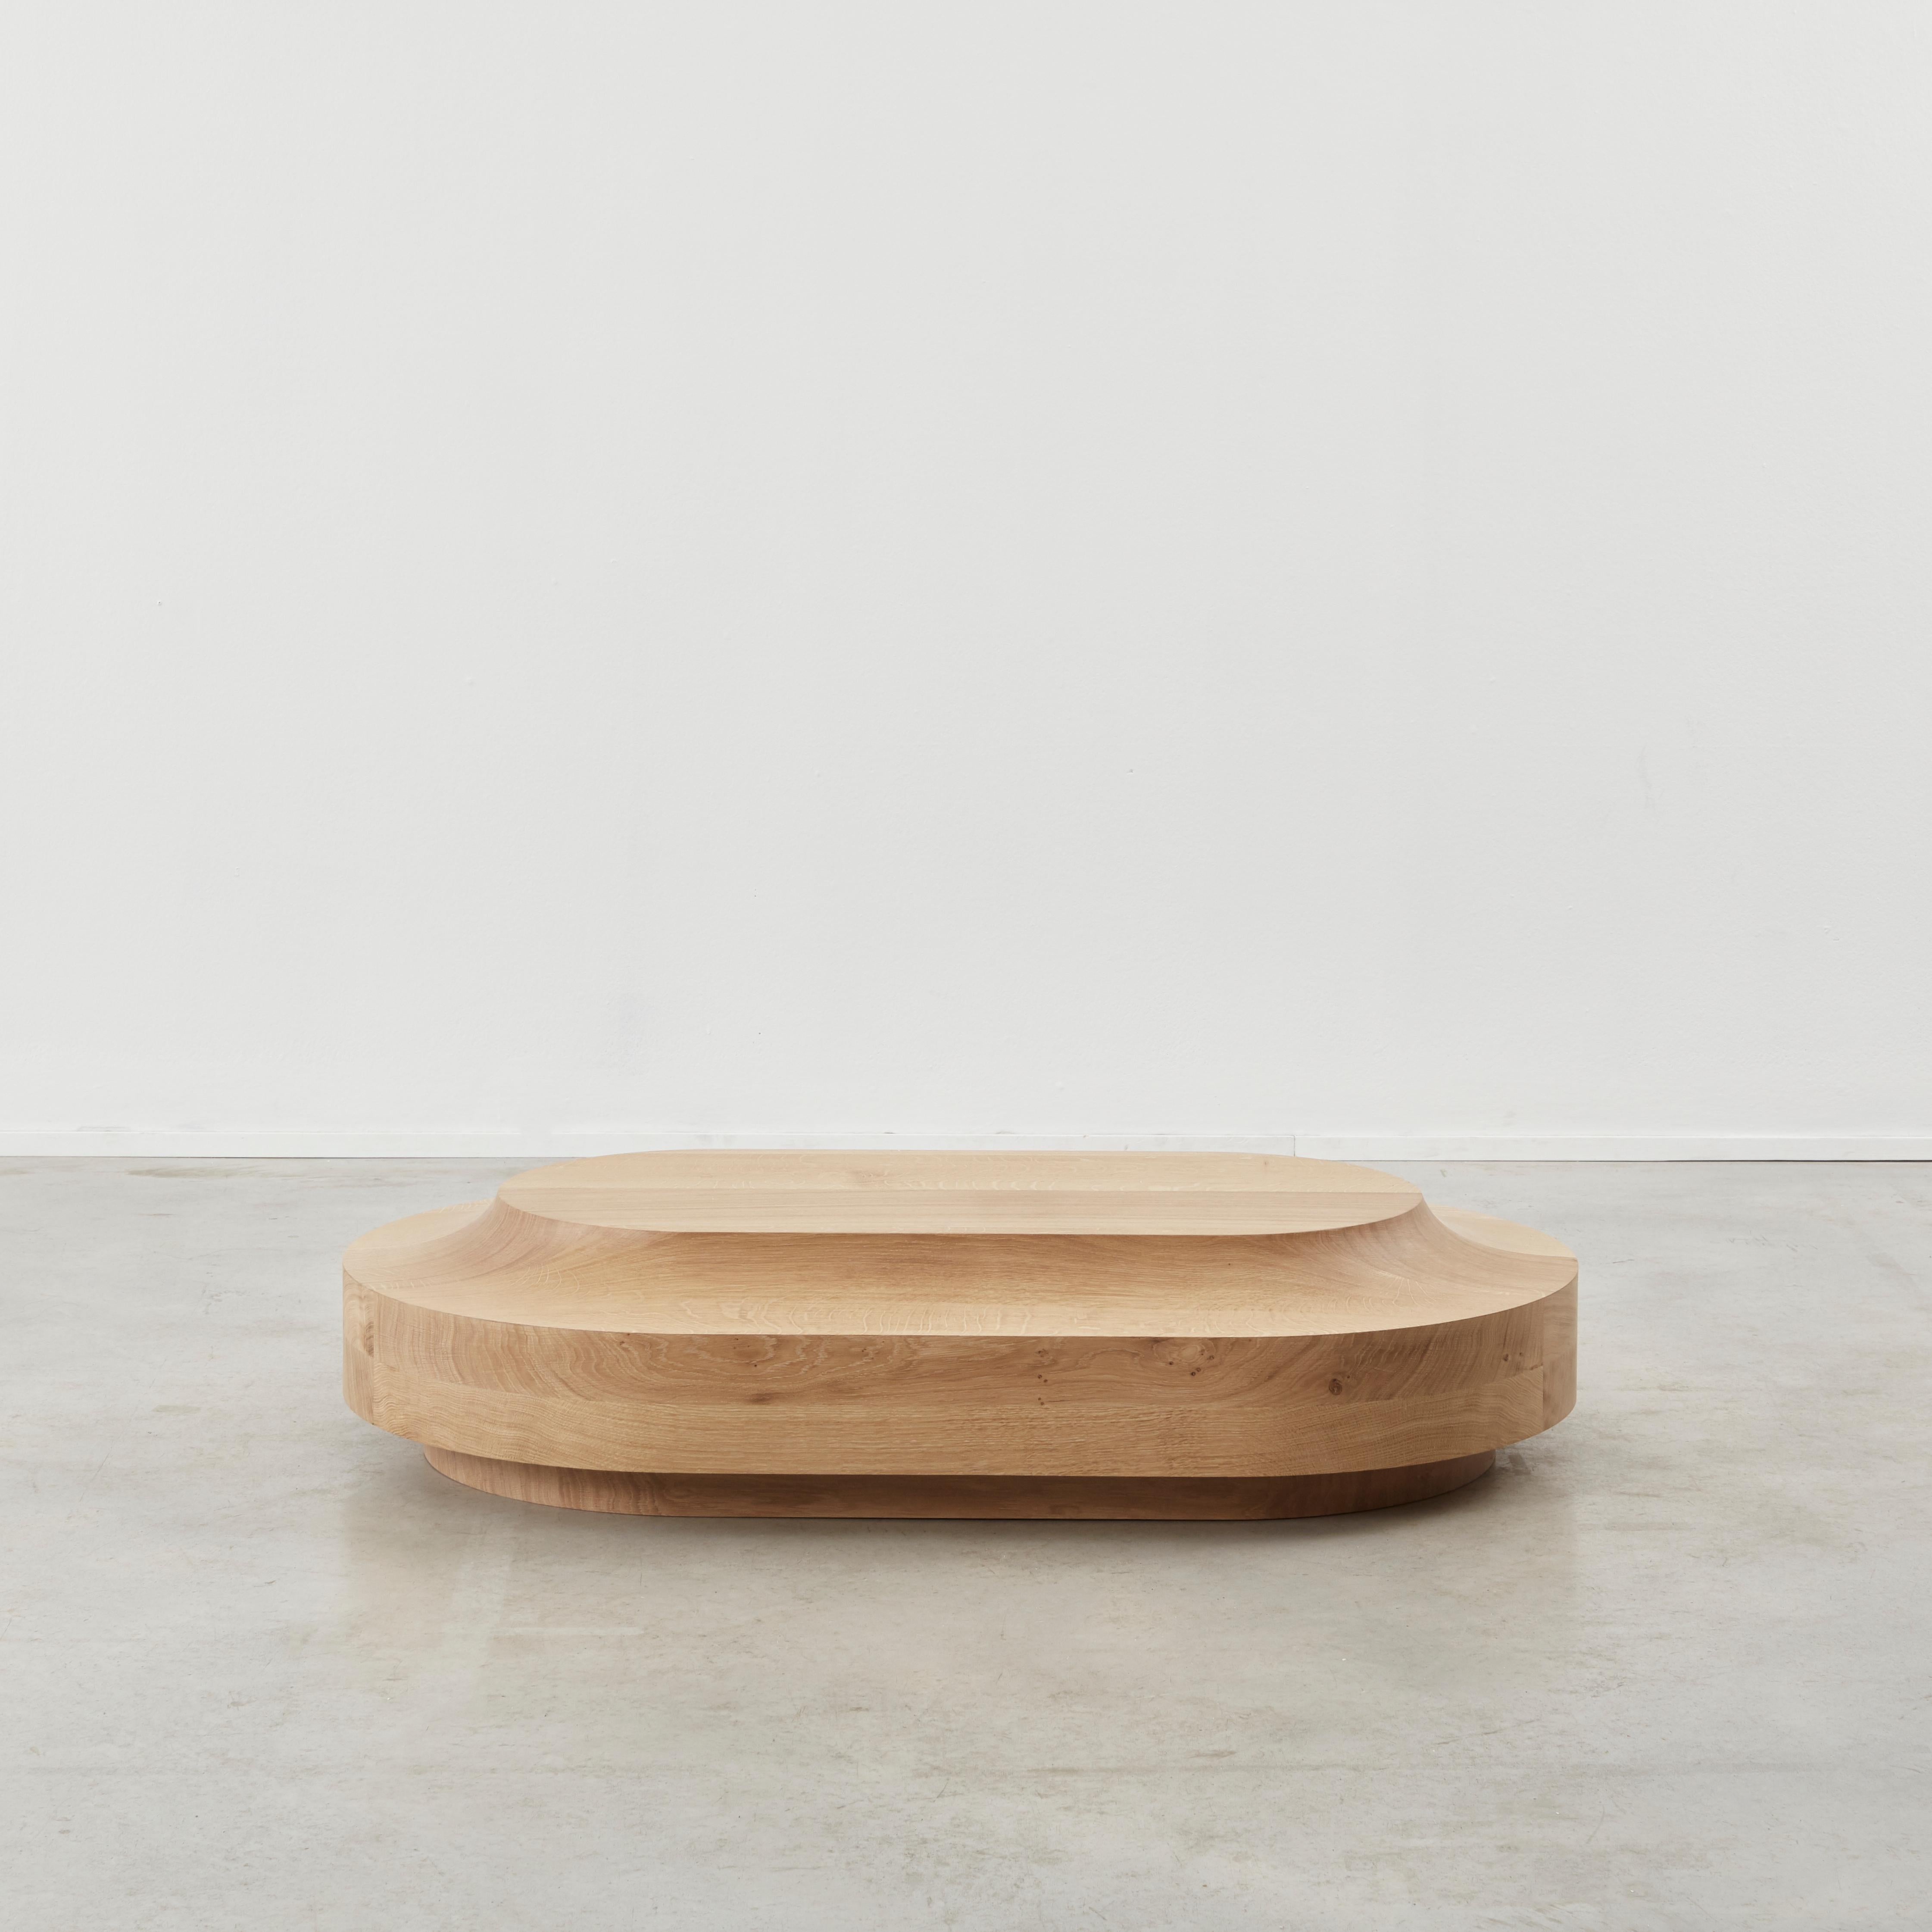 Benni Allan 'Low Table One' in oak by EBBA, UK, 2022 In New Condition For Sale In London, GB